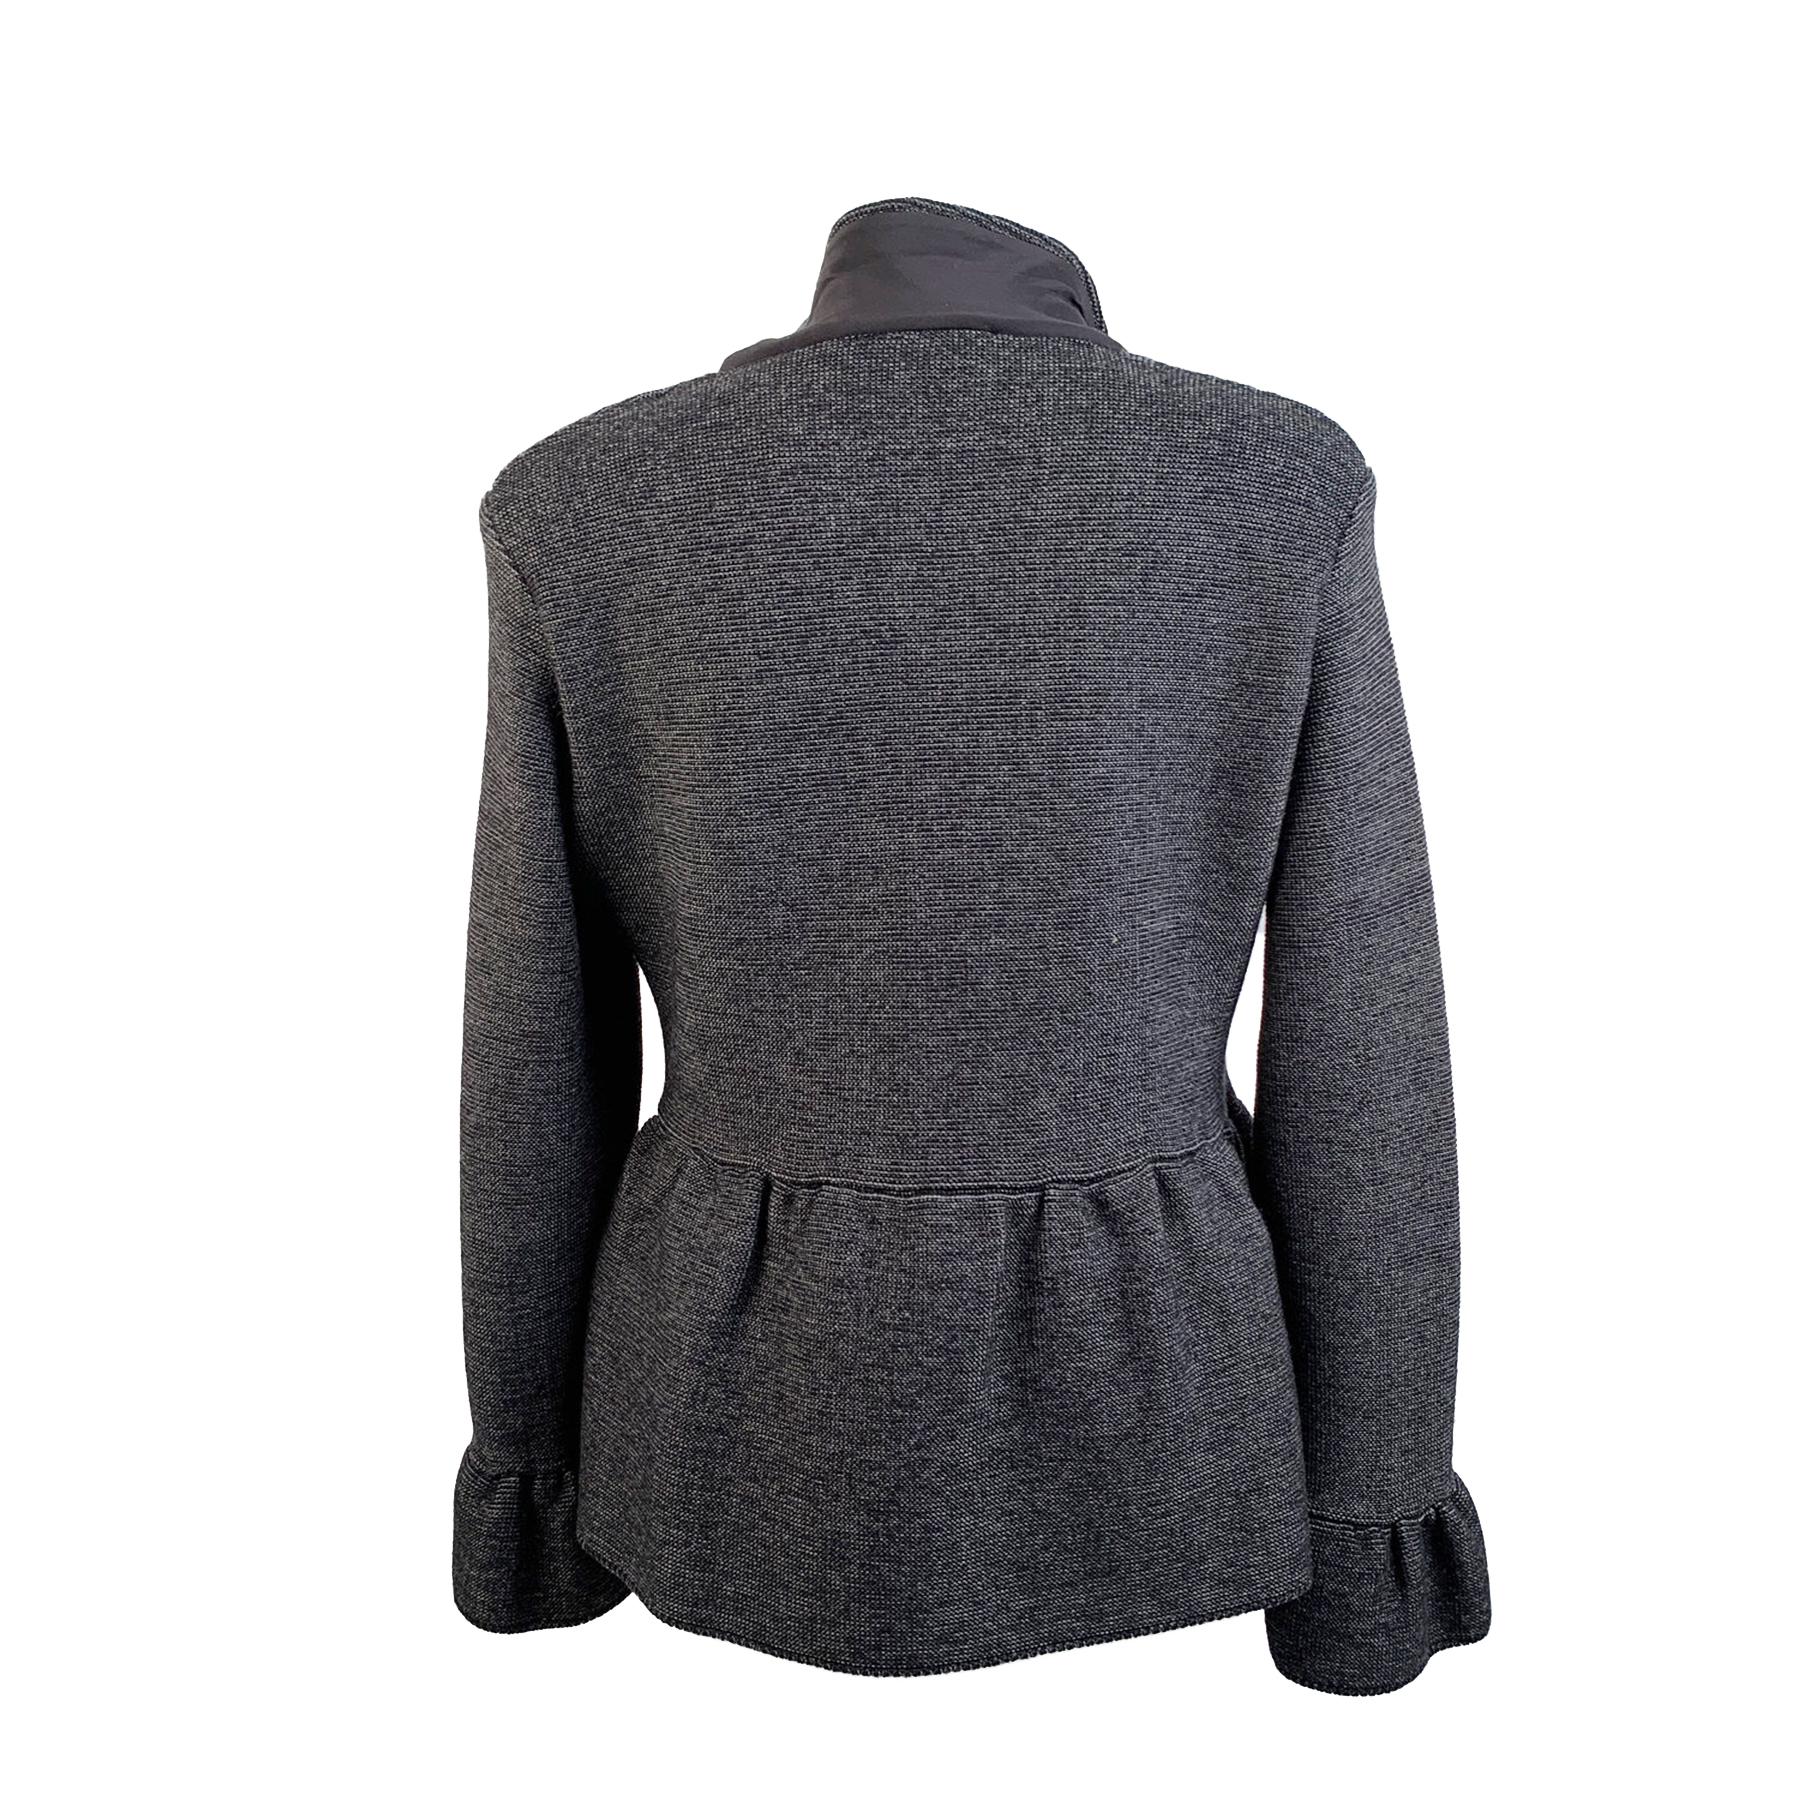 Christian Dior vintage gray cardigan with peplum hem. Shirt collar. Button closure on the front. Composition: 100% Wool. Unlined. Made in Italy. Size: 40 F, 12 GB, 44 IT, 38 D, 8 USA (The size shown for this item is the size indicated by the